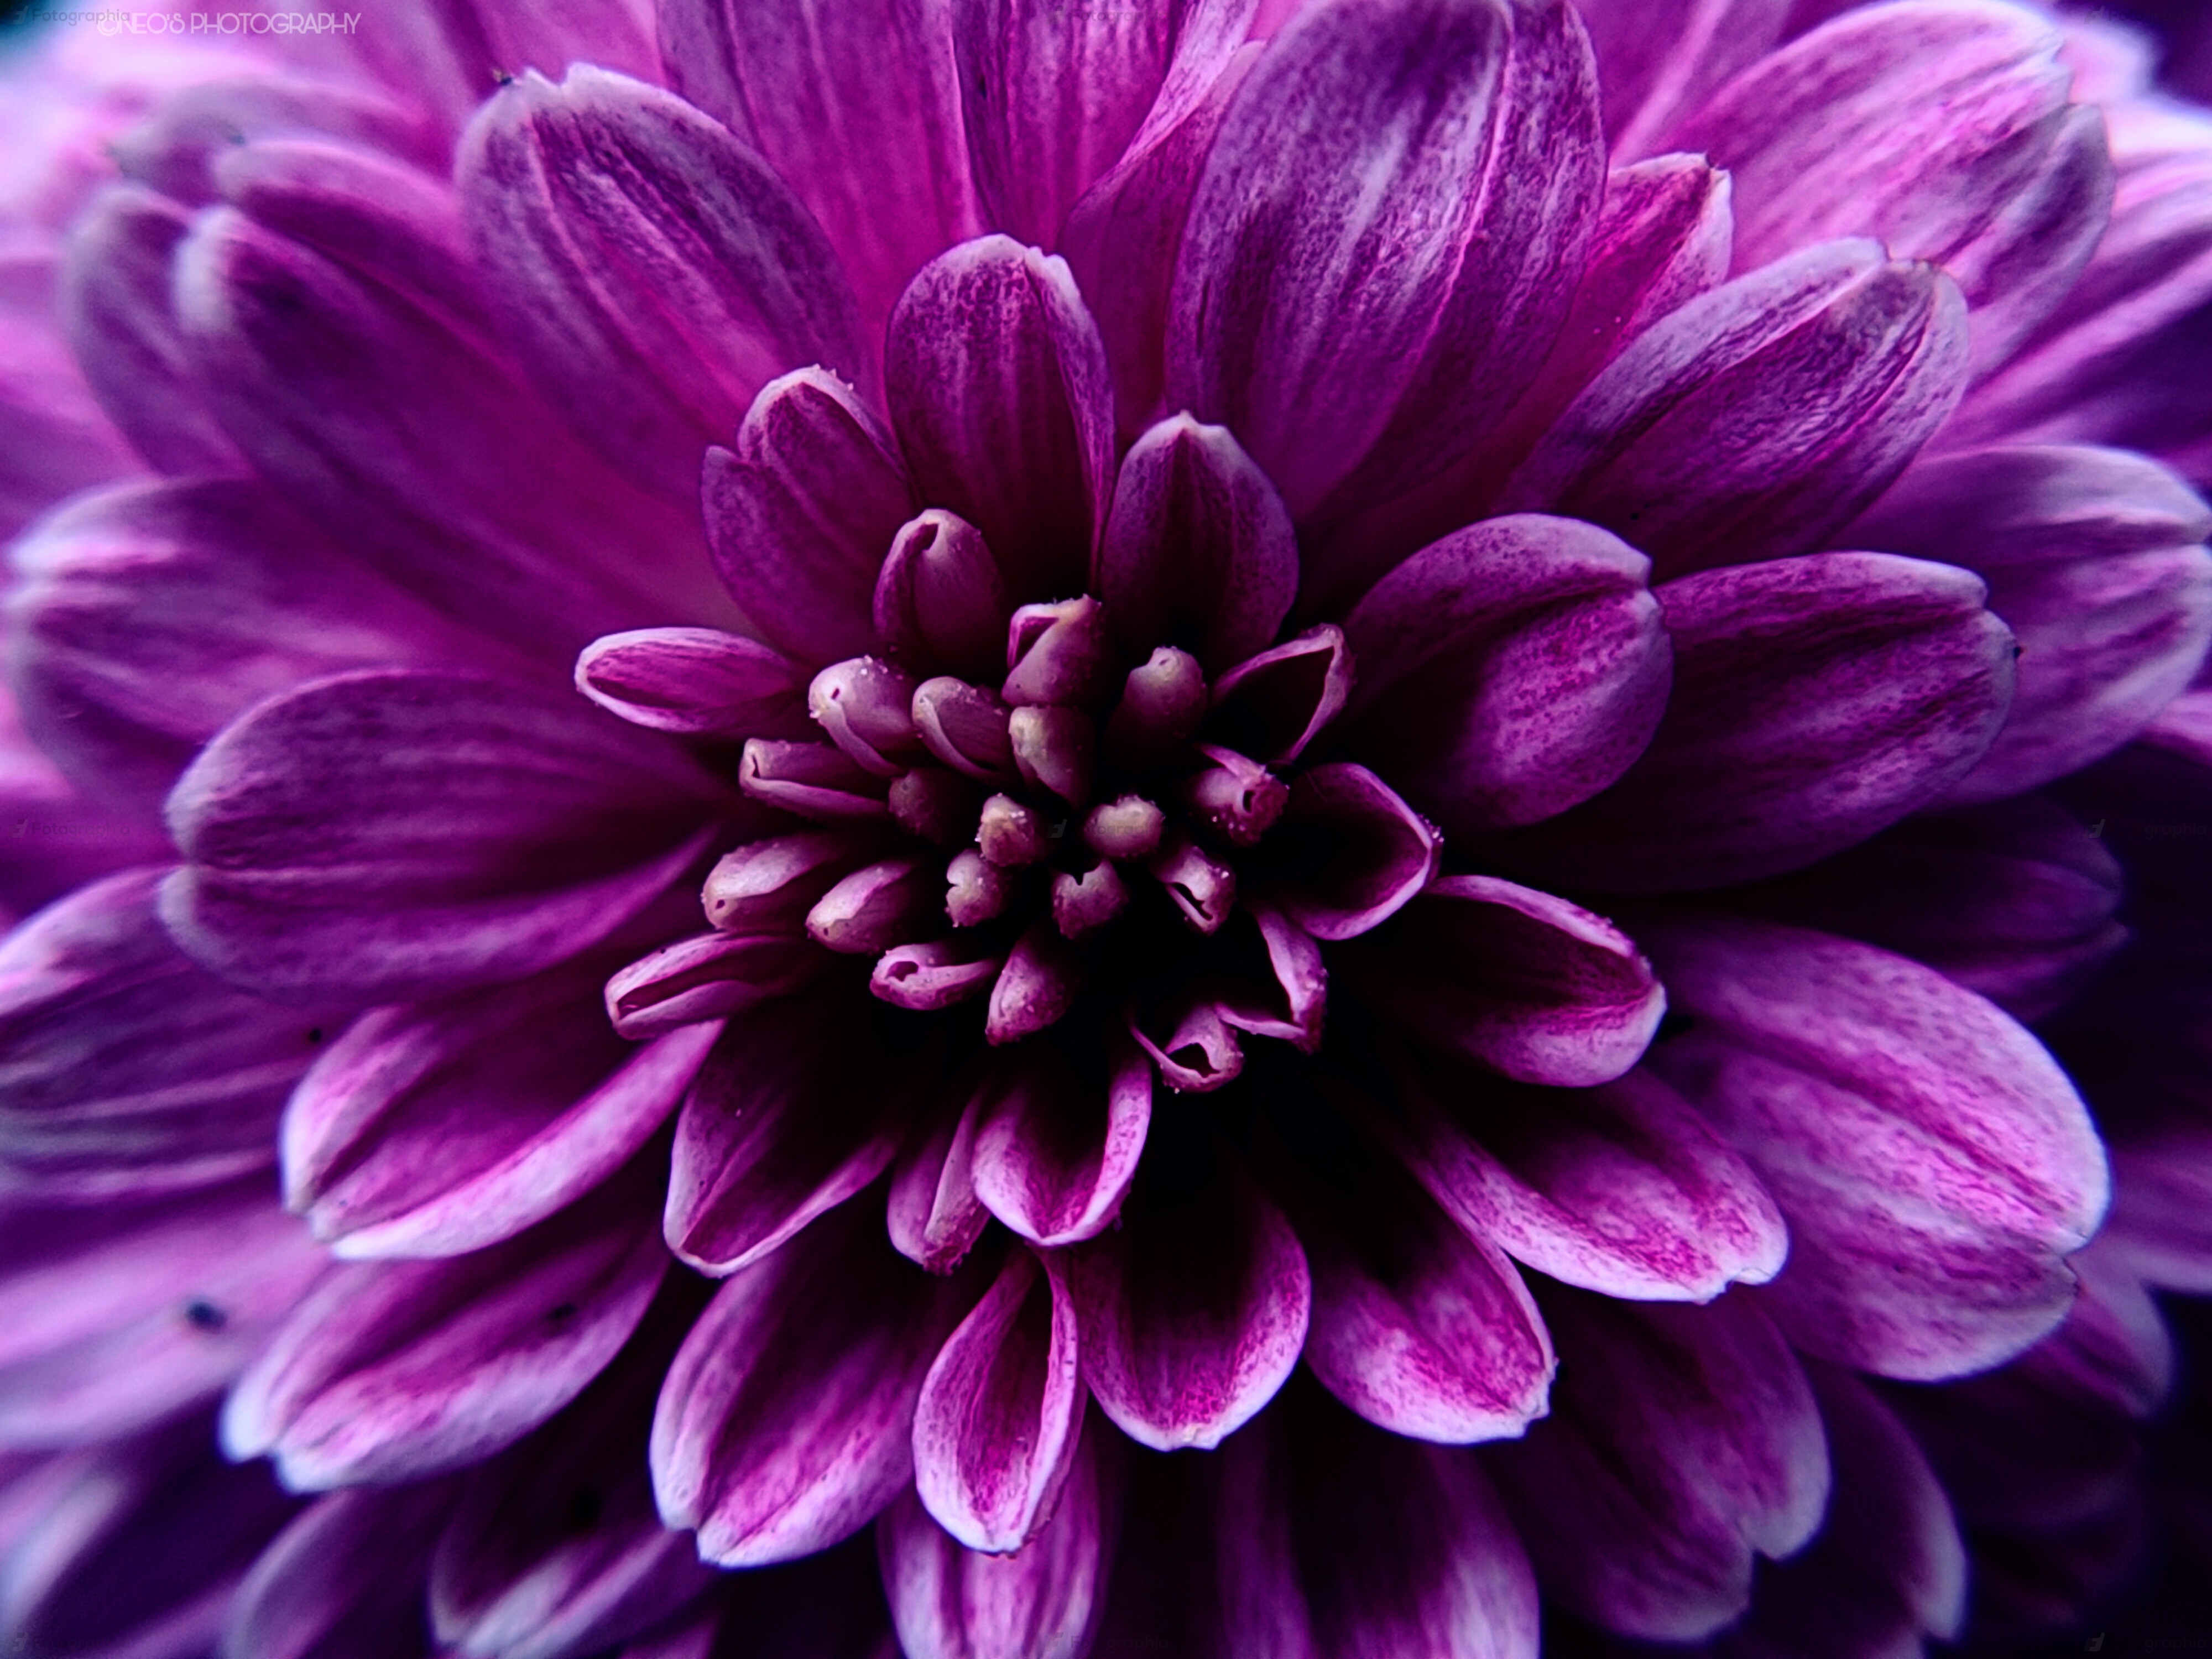 The Aster flower